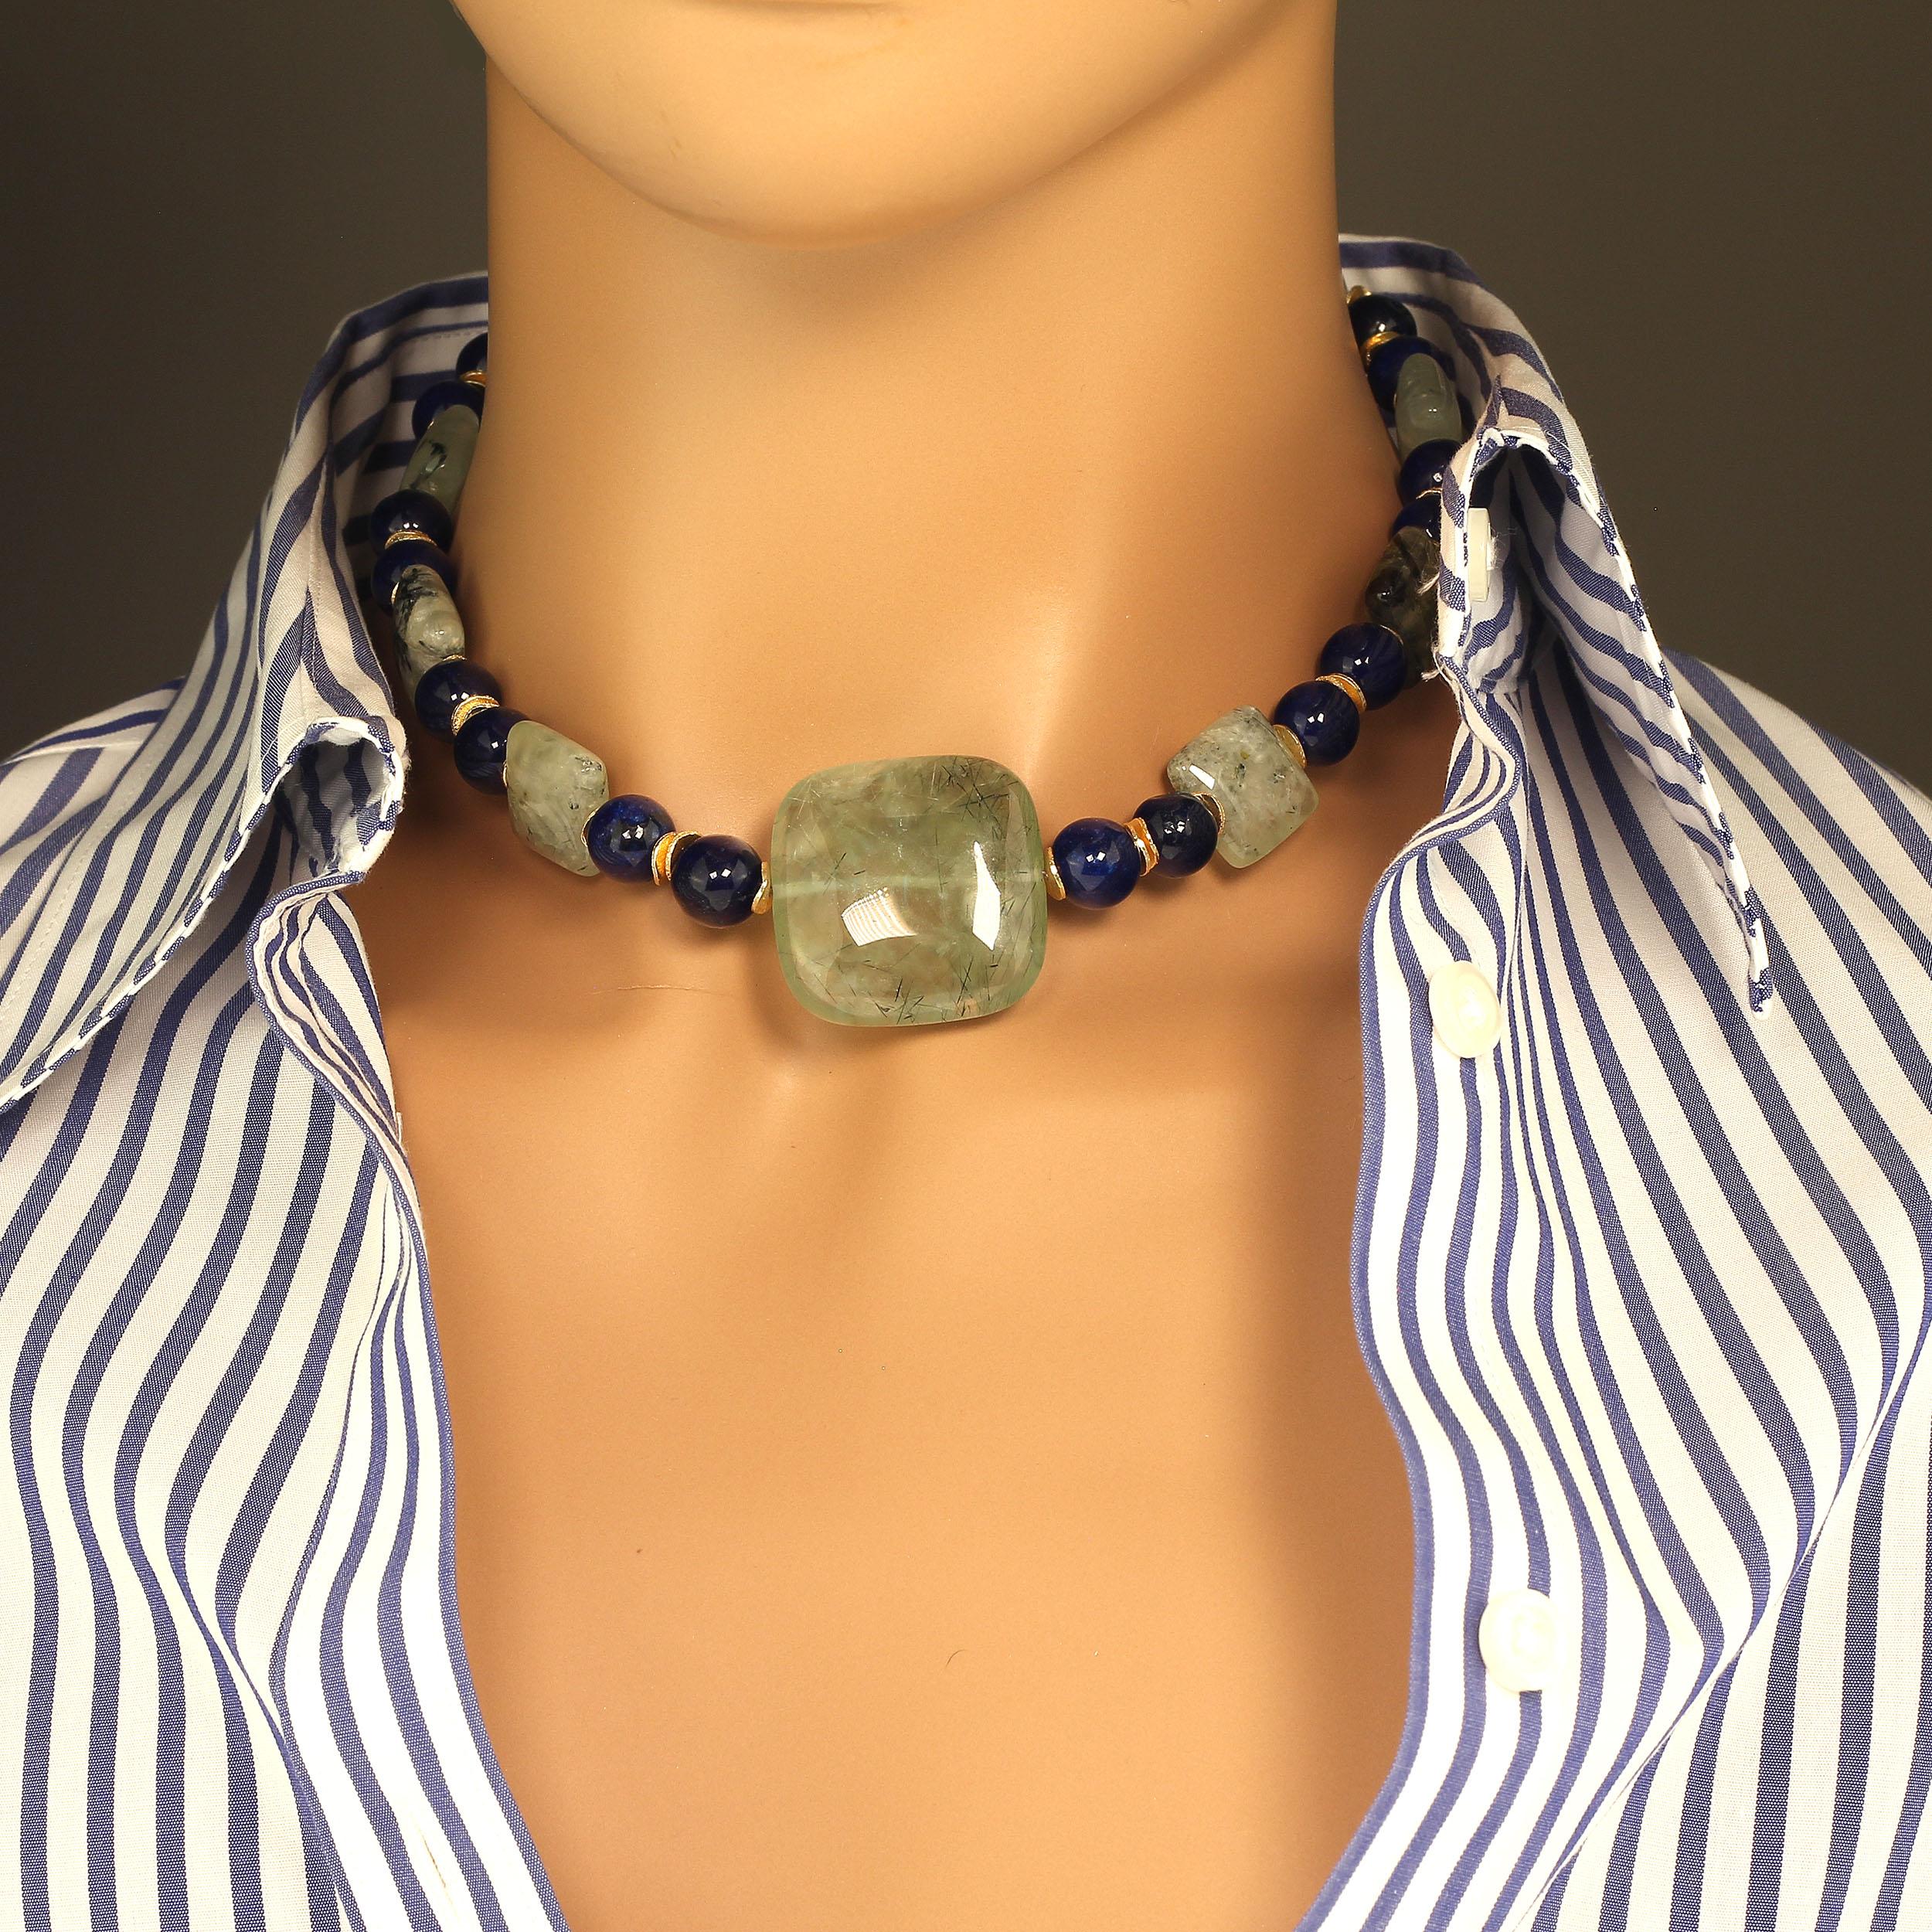 Unique 16 inch choker necklace of green Prehnite and blue Agate. This gorgeous Prehnite comes straight from one of our favorite suppliers in Sao Paulo, Brazil. Our elegant necklace features interesting Prehnite in three sizes of square tablets, one